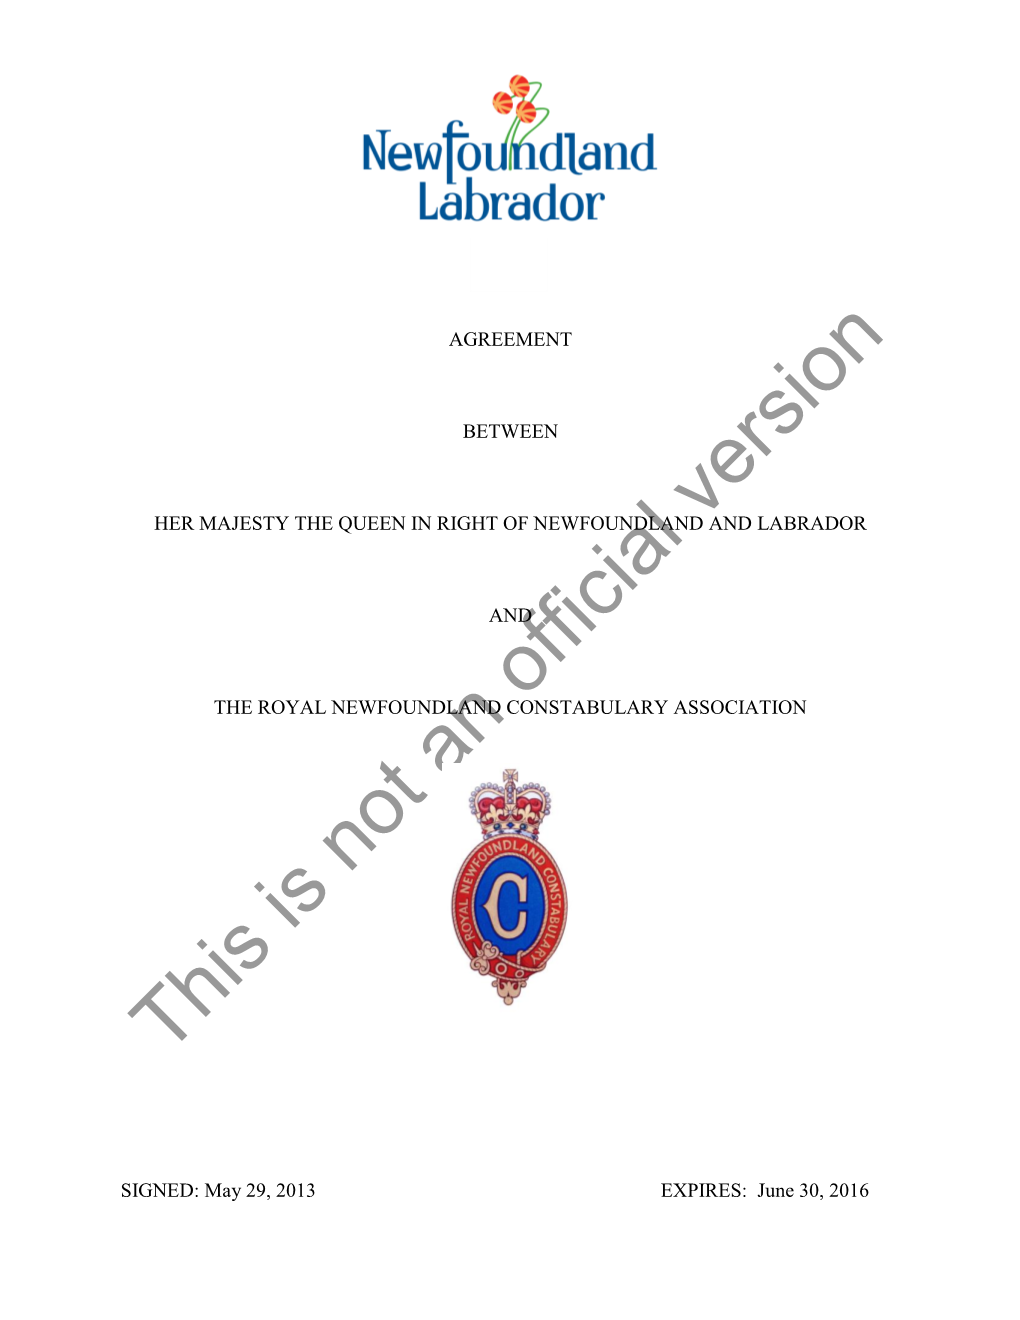 Agreement Between Her Majesty the Queen in Right of Newfoundland and Labrador and the Royal Newfoundland Constabulary Associatio